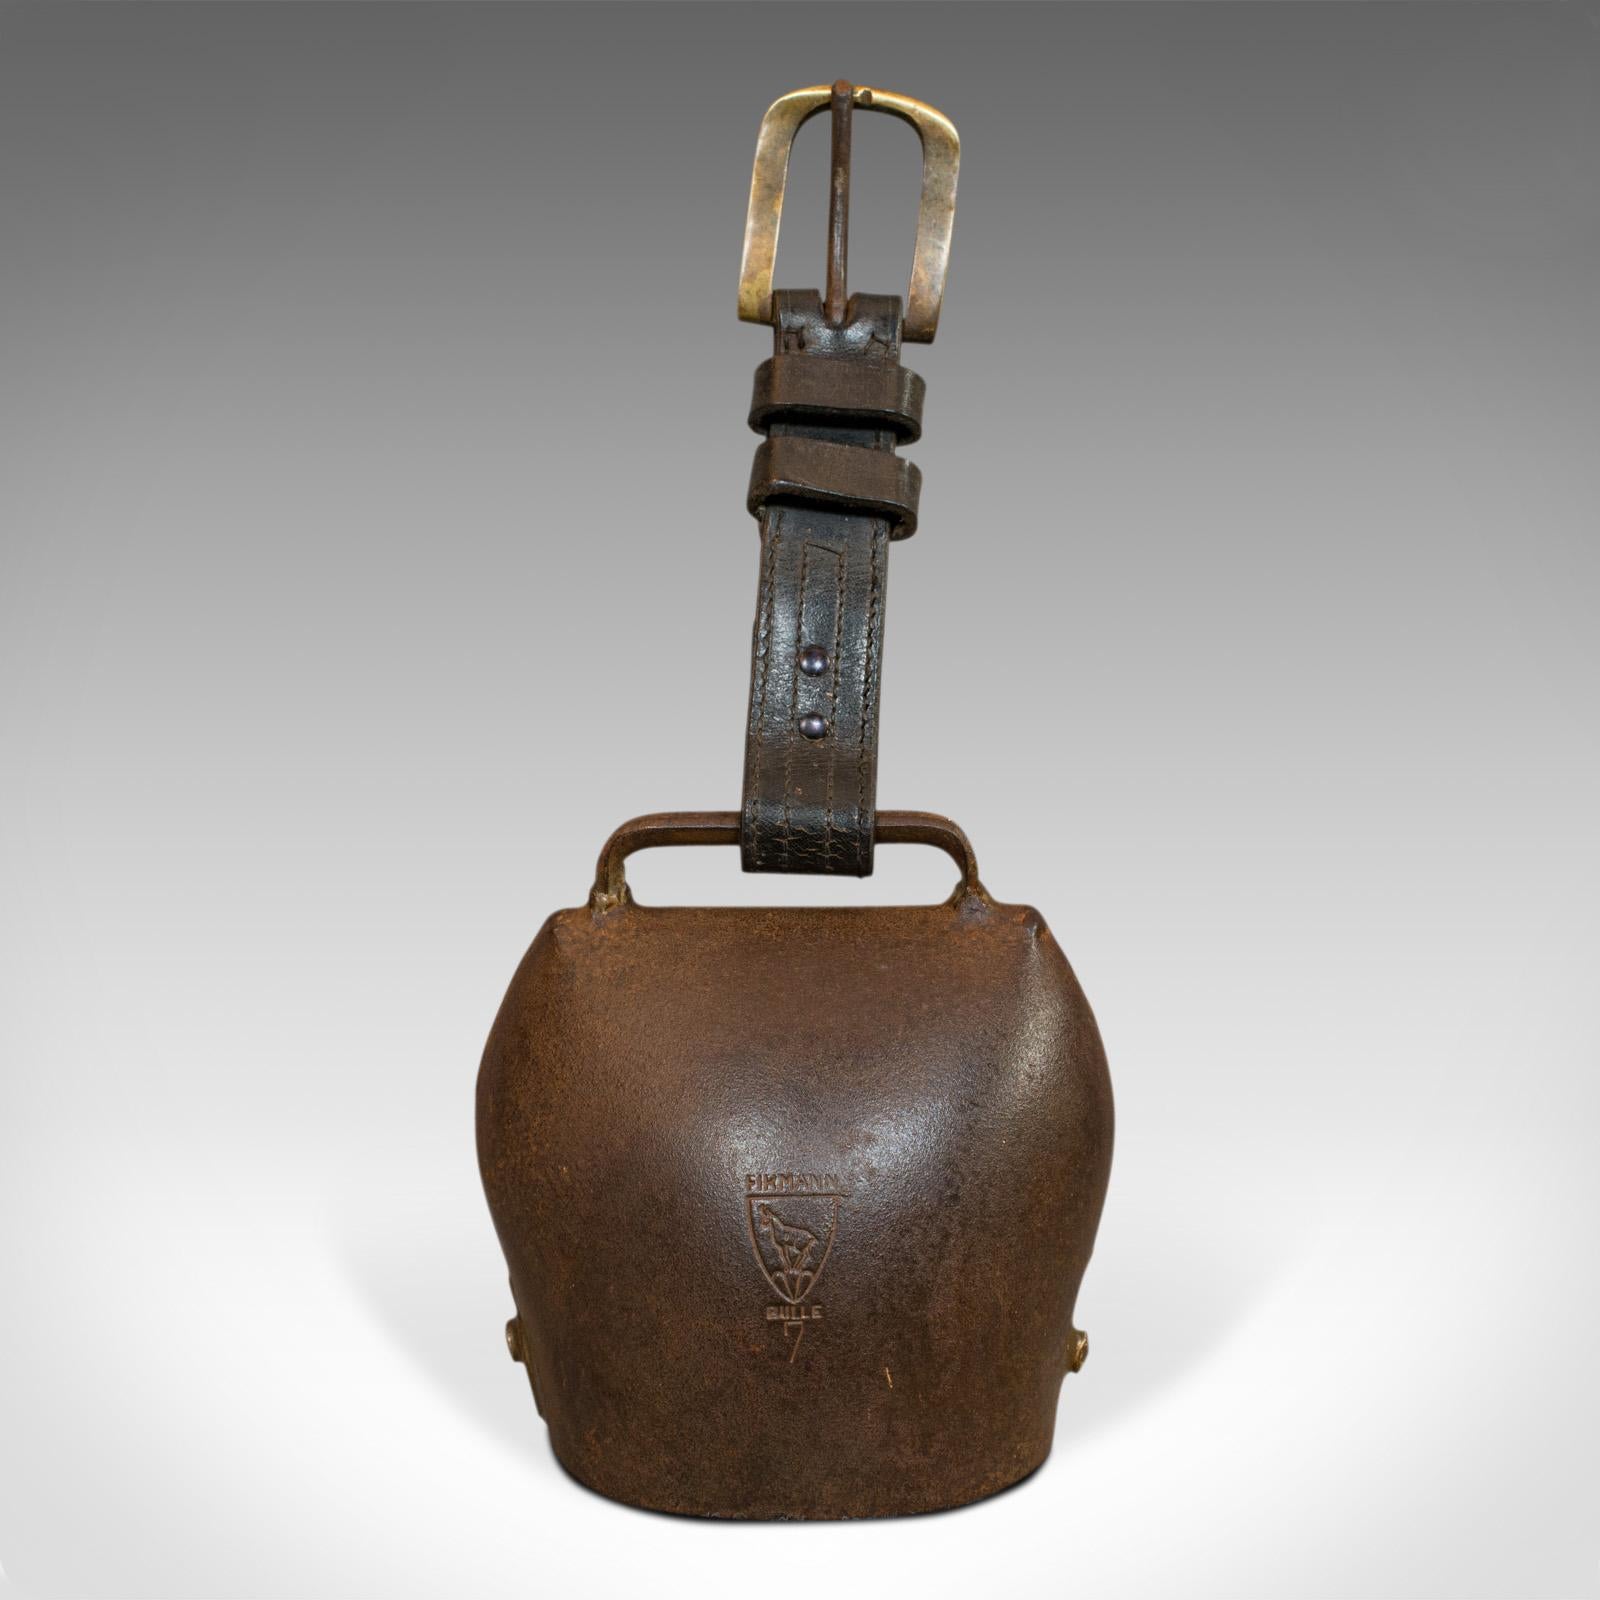 This is a vintage bell. A Swiss, tin and leather 'Grade 7' trychel cow bell or cloche by Ateliers Firmann, dating to circa 1950.

Classic Alpine cloche
Displays a desirable aged patina - weathered tin in dark russet hues
Rings with an evocative,